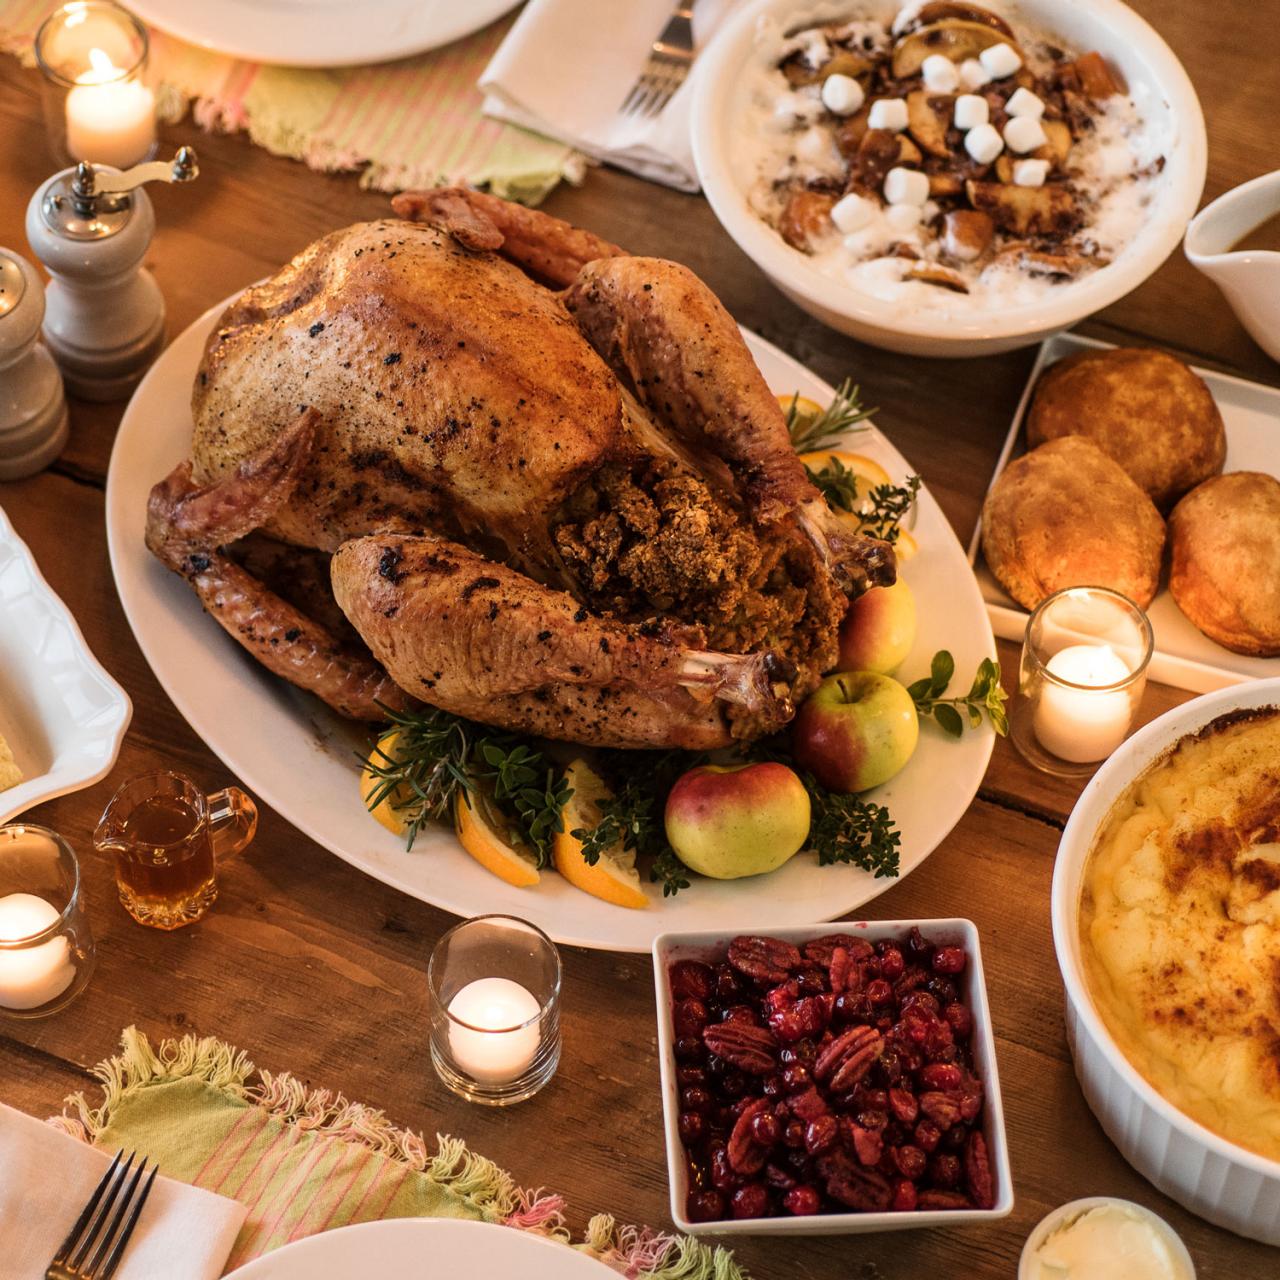 7 expert tips for setting the perfect Thanksgiving table - Village